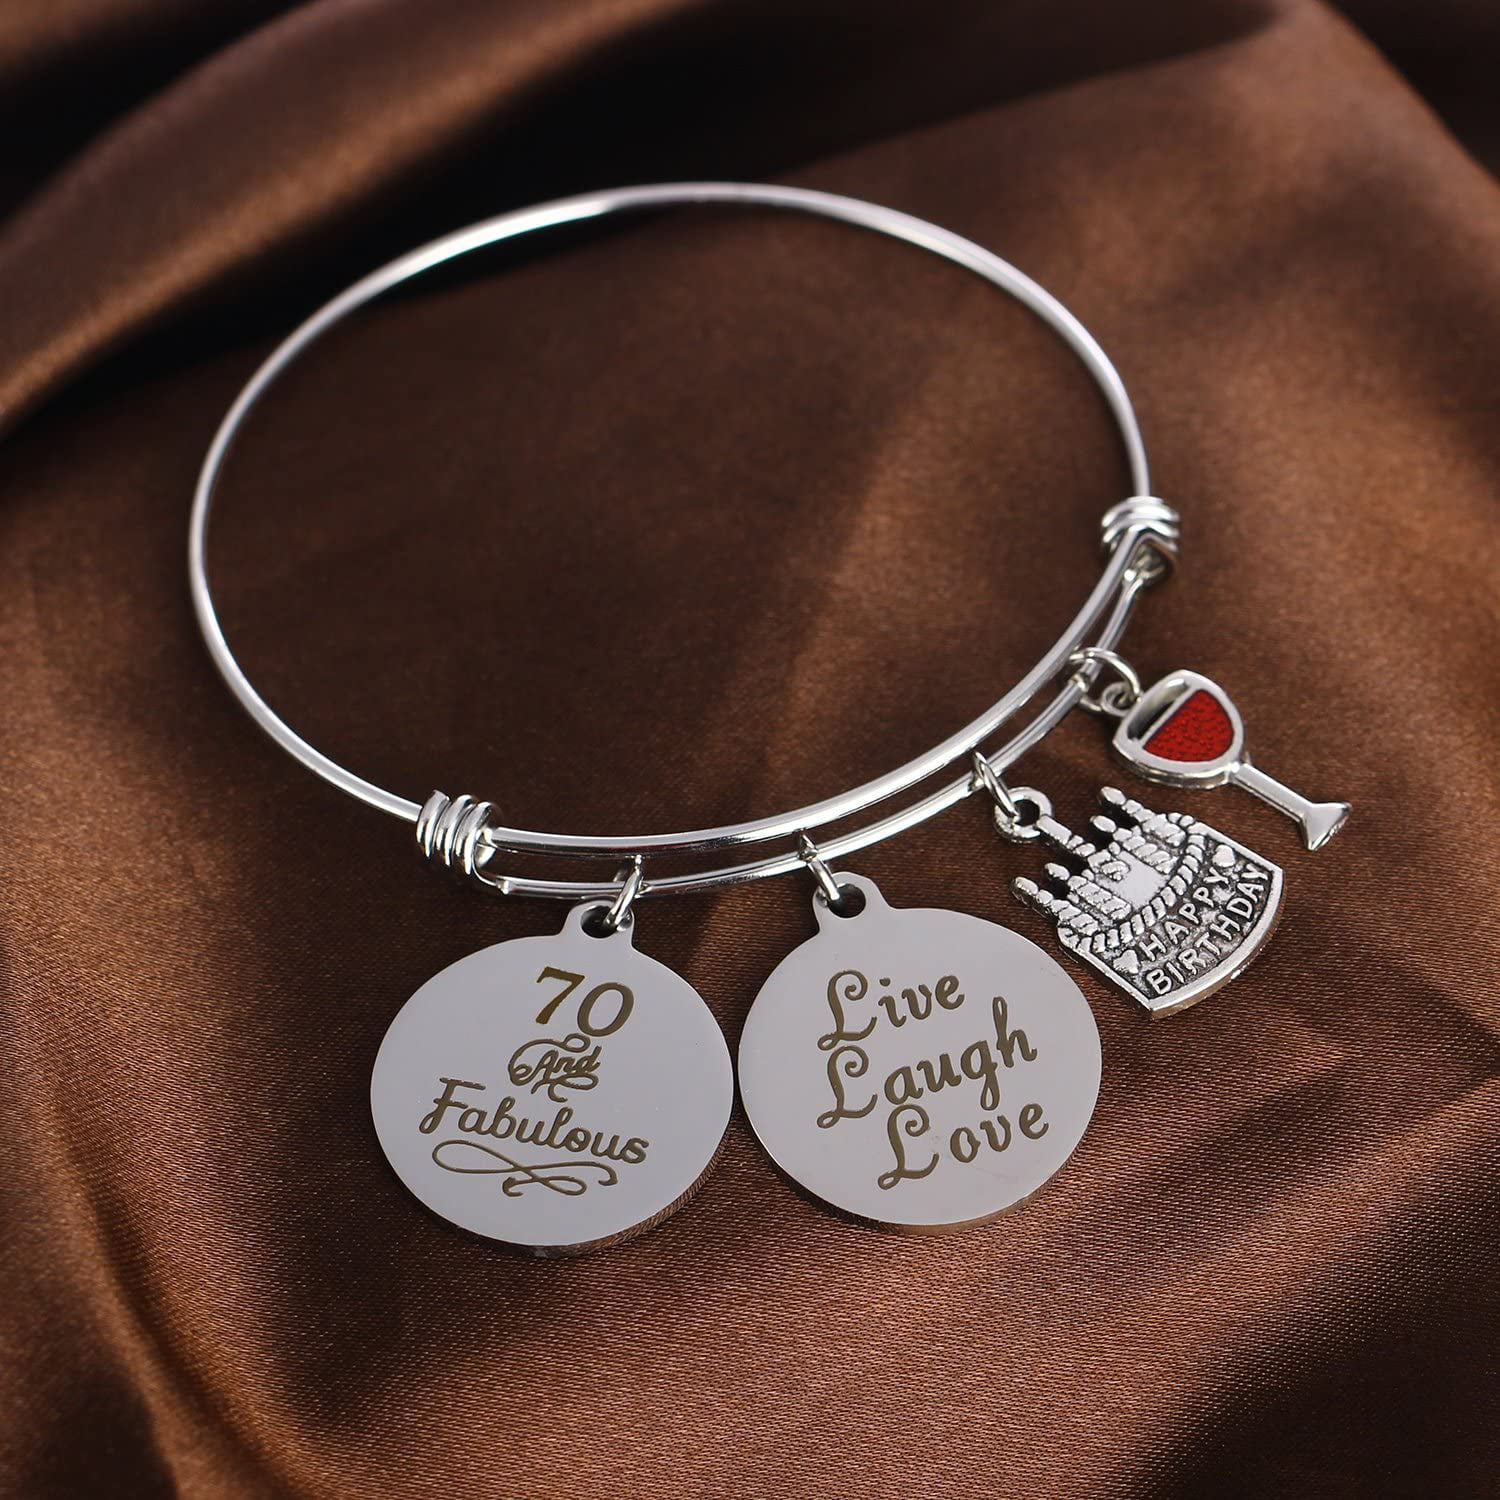 Gifts for Her YeeQin Happy Birthday Bangles Cake Cheer Live Laugh Love Charms Bangle Bracelets 